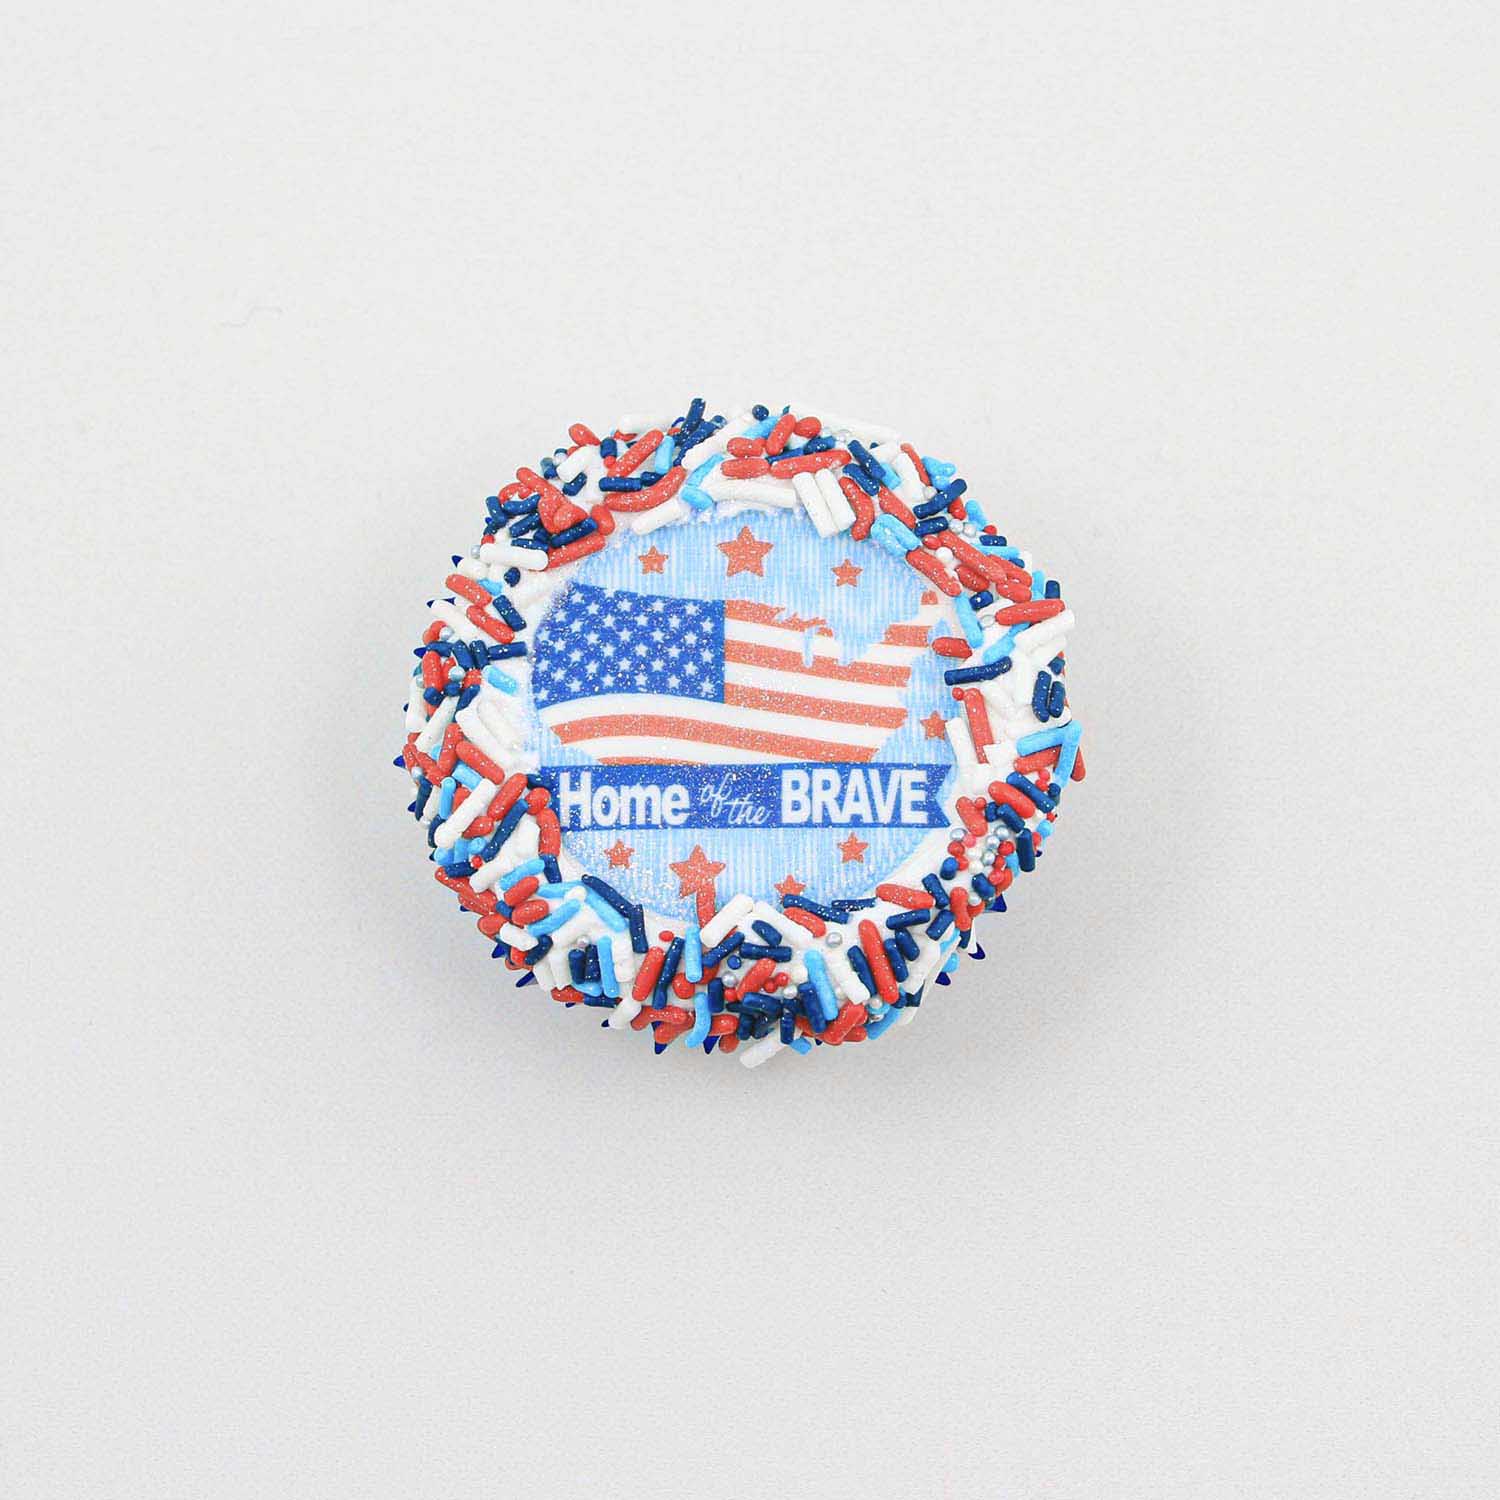 Home of the brave edible image cupcake topper with white buttercream and red white and blue jimmies